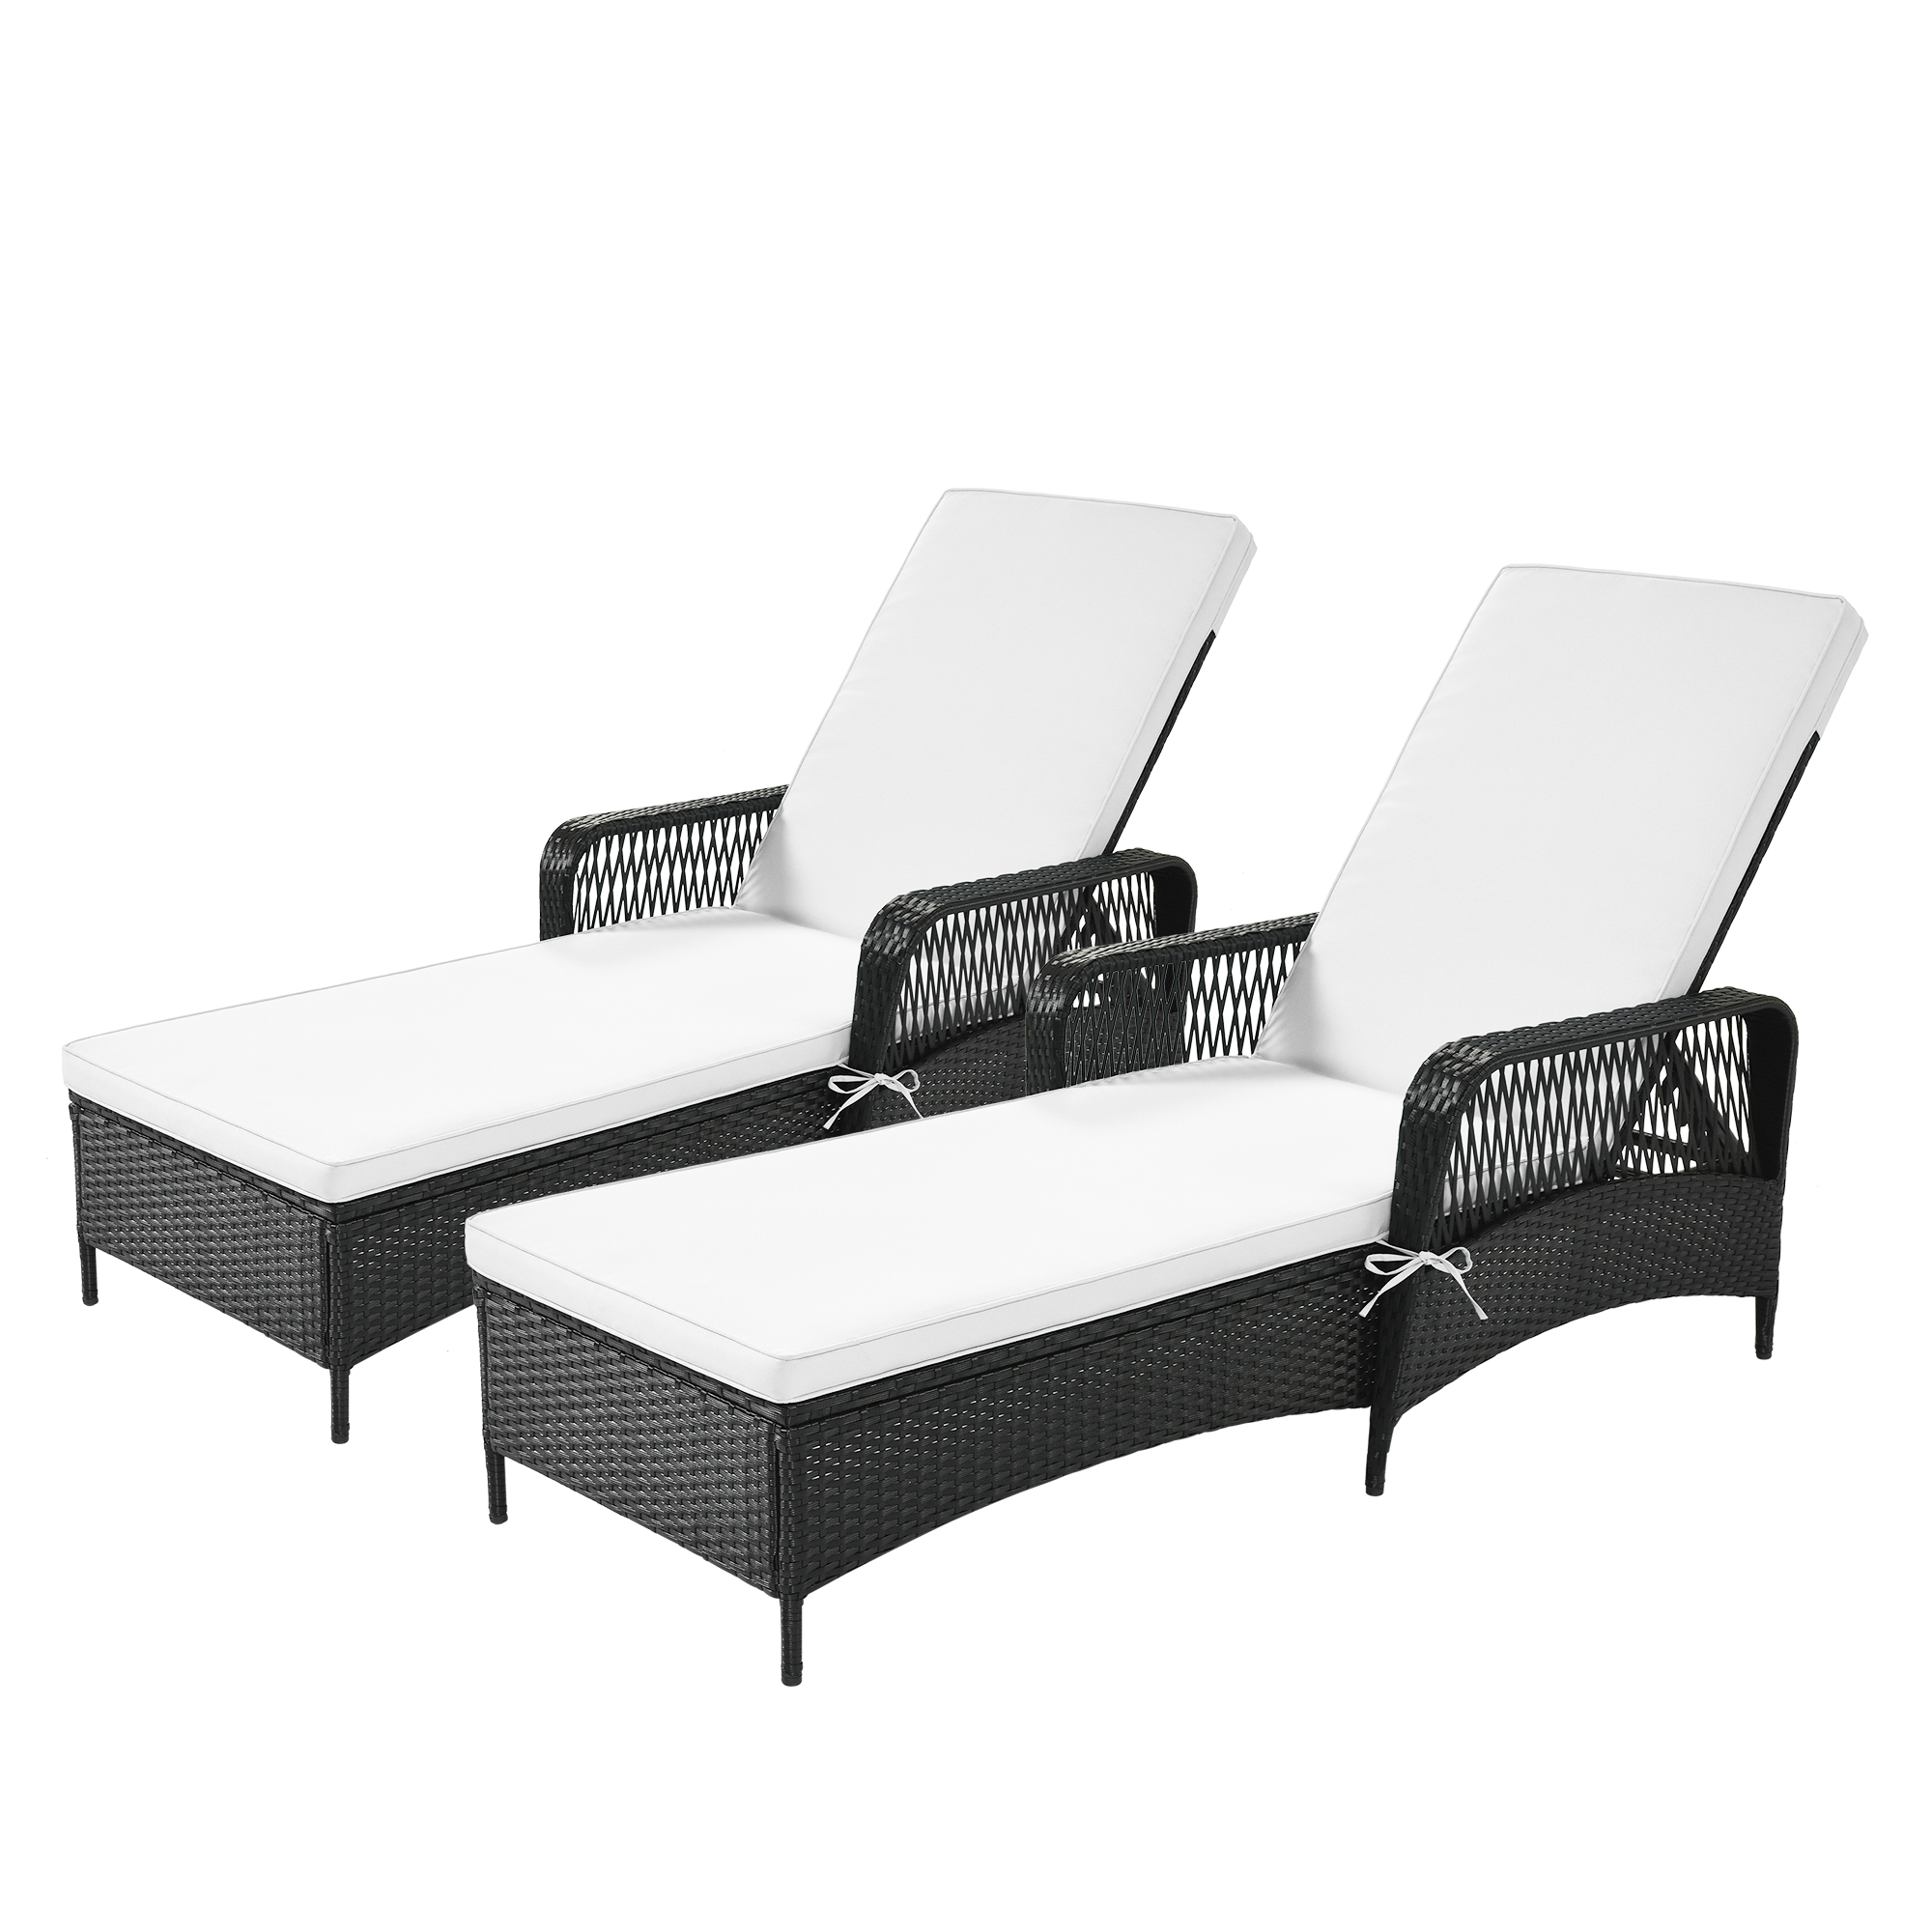 2PCS Chaise Lounges for Beach, Aukfa Adjustable Patio Chaise Lounge Chair, Outdoor Rattan Lounge Chair with Armrest and Cushion, Patio Furniture Recliner for Deck, Poolside, Backyard - image 2 of 11